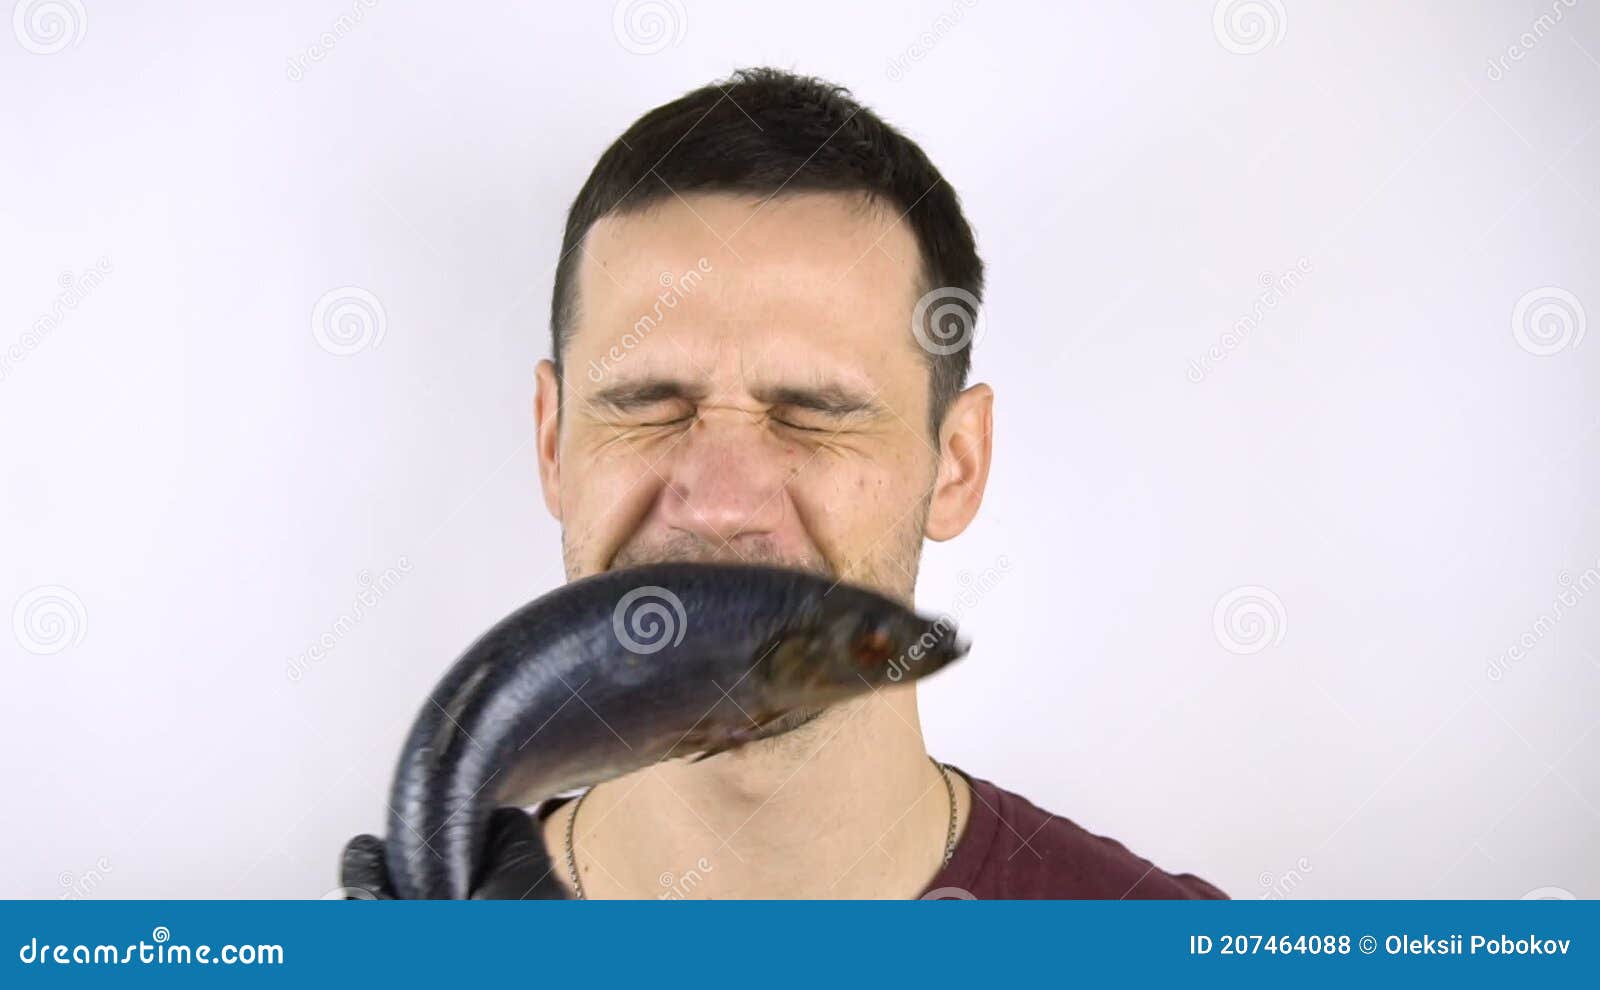 eel slap to the face